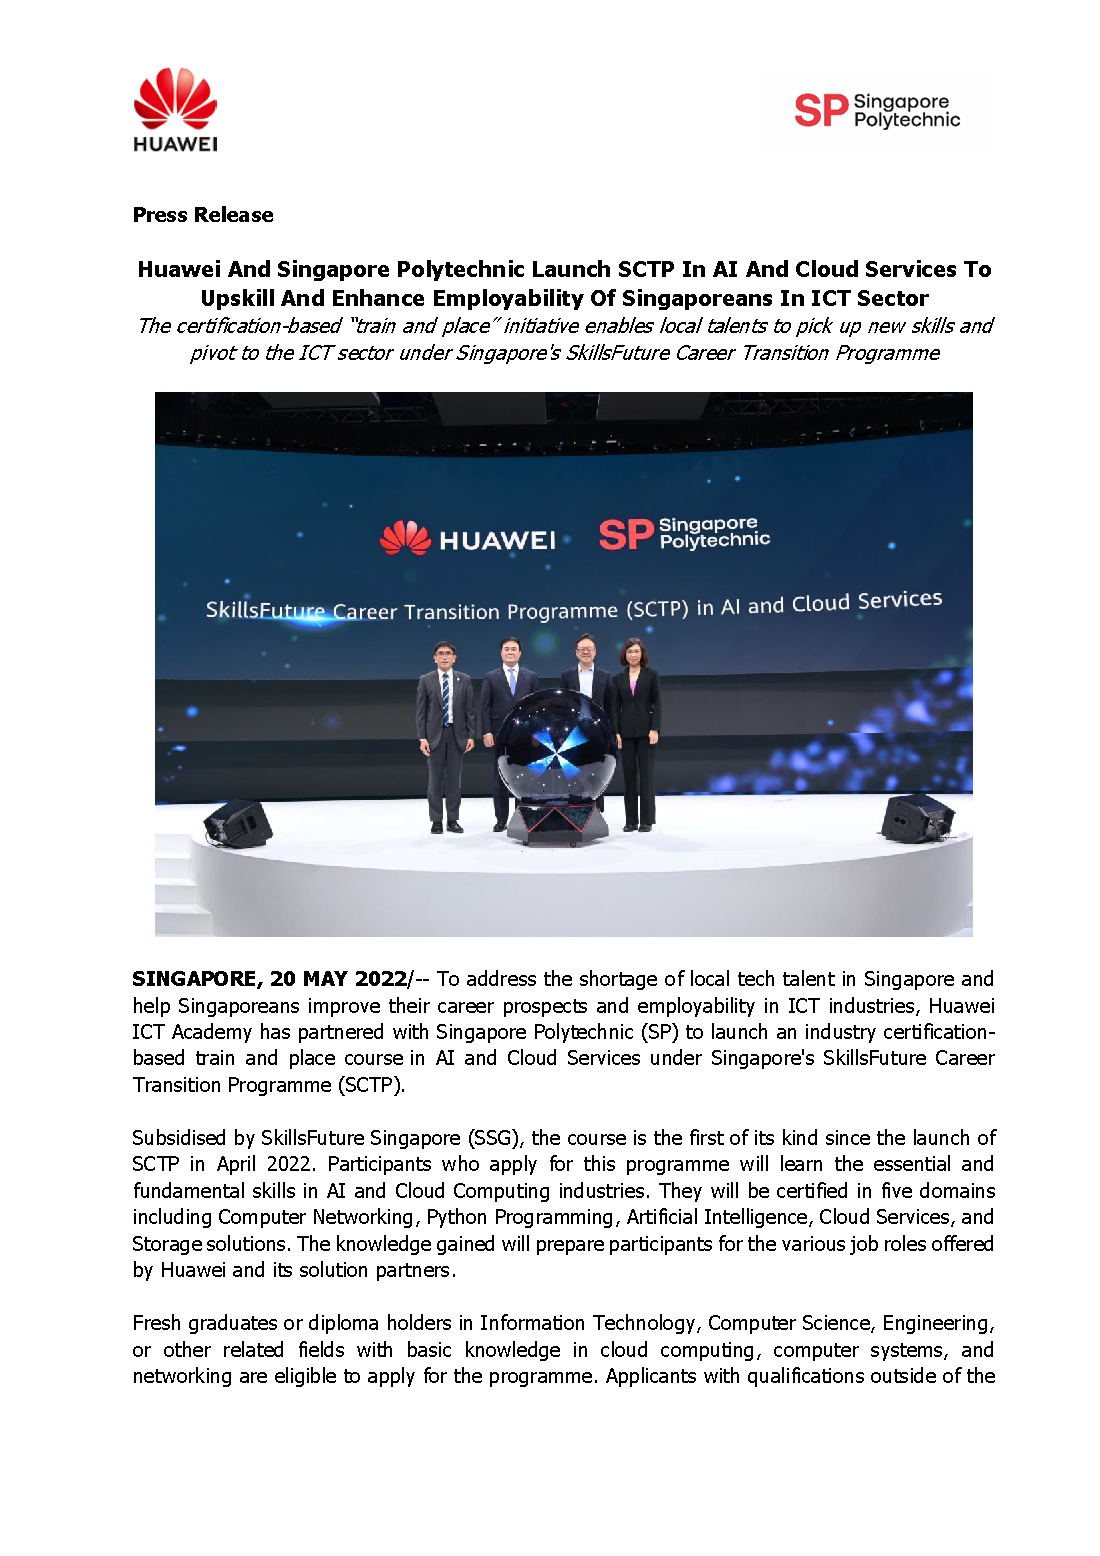 Press Release - Huawei and Singapore Polytechnic Launch AI and Cloud Services Programme to upskill and enhance employability for Singaporeans_19052022_Page_1